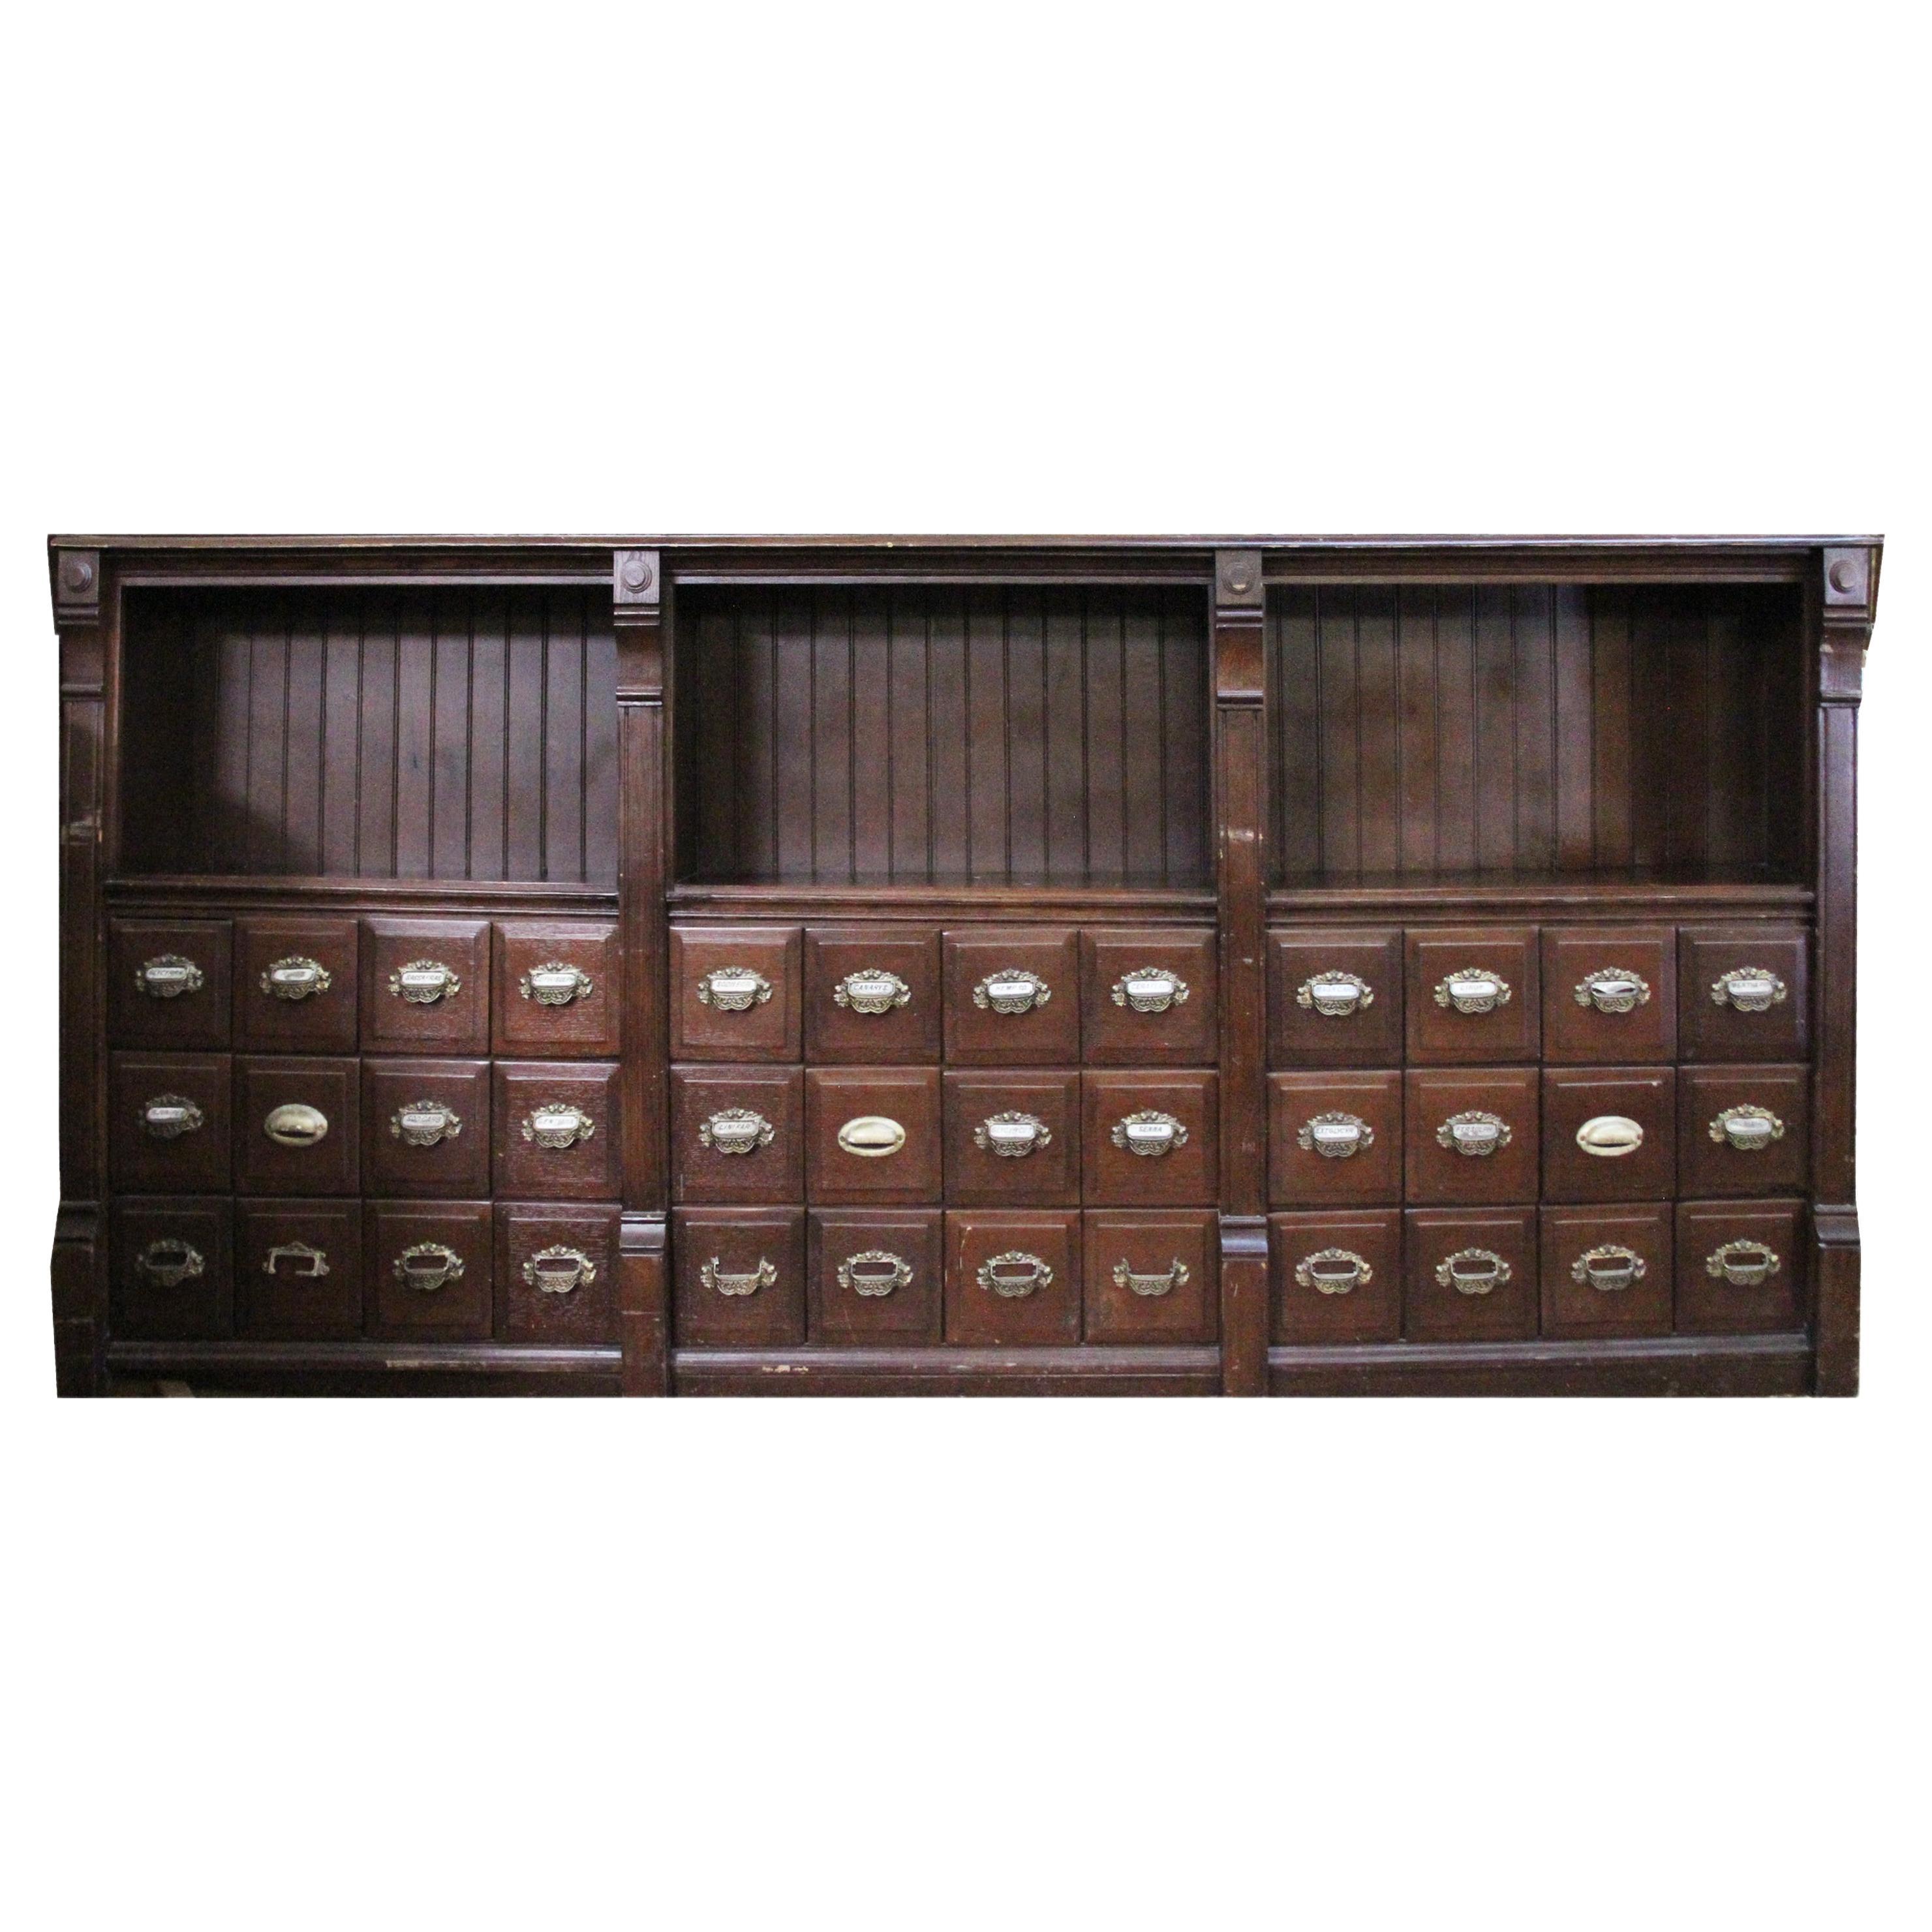 9FT Antique Apothecary cabinet

Fantastic cabinet from a Texas University Pharmacy College. One piece with 3 sections and 36 drawers. Hand carved details. Retains original category labeling with beautiful brass pulls. The top features open